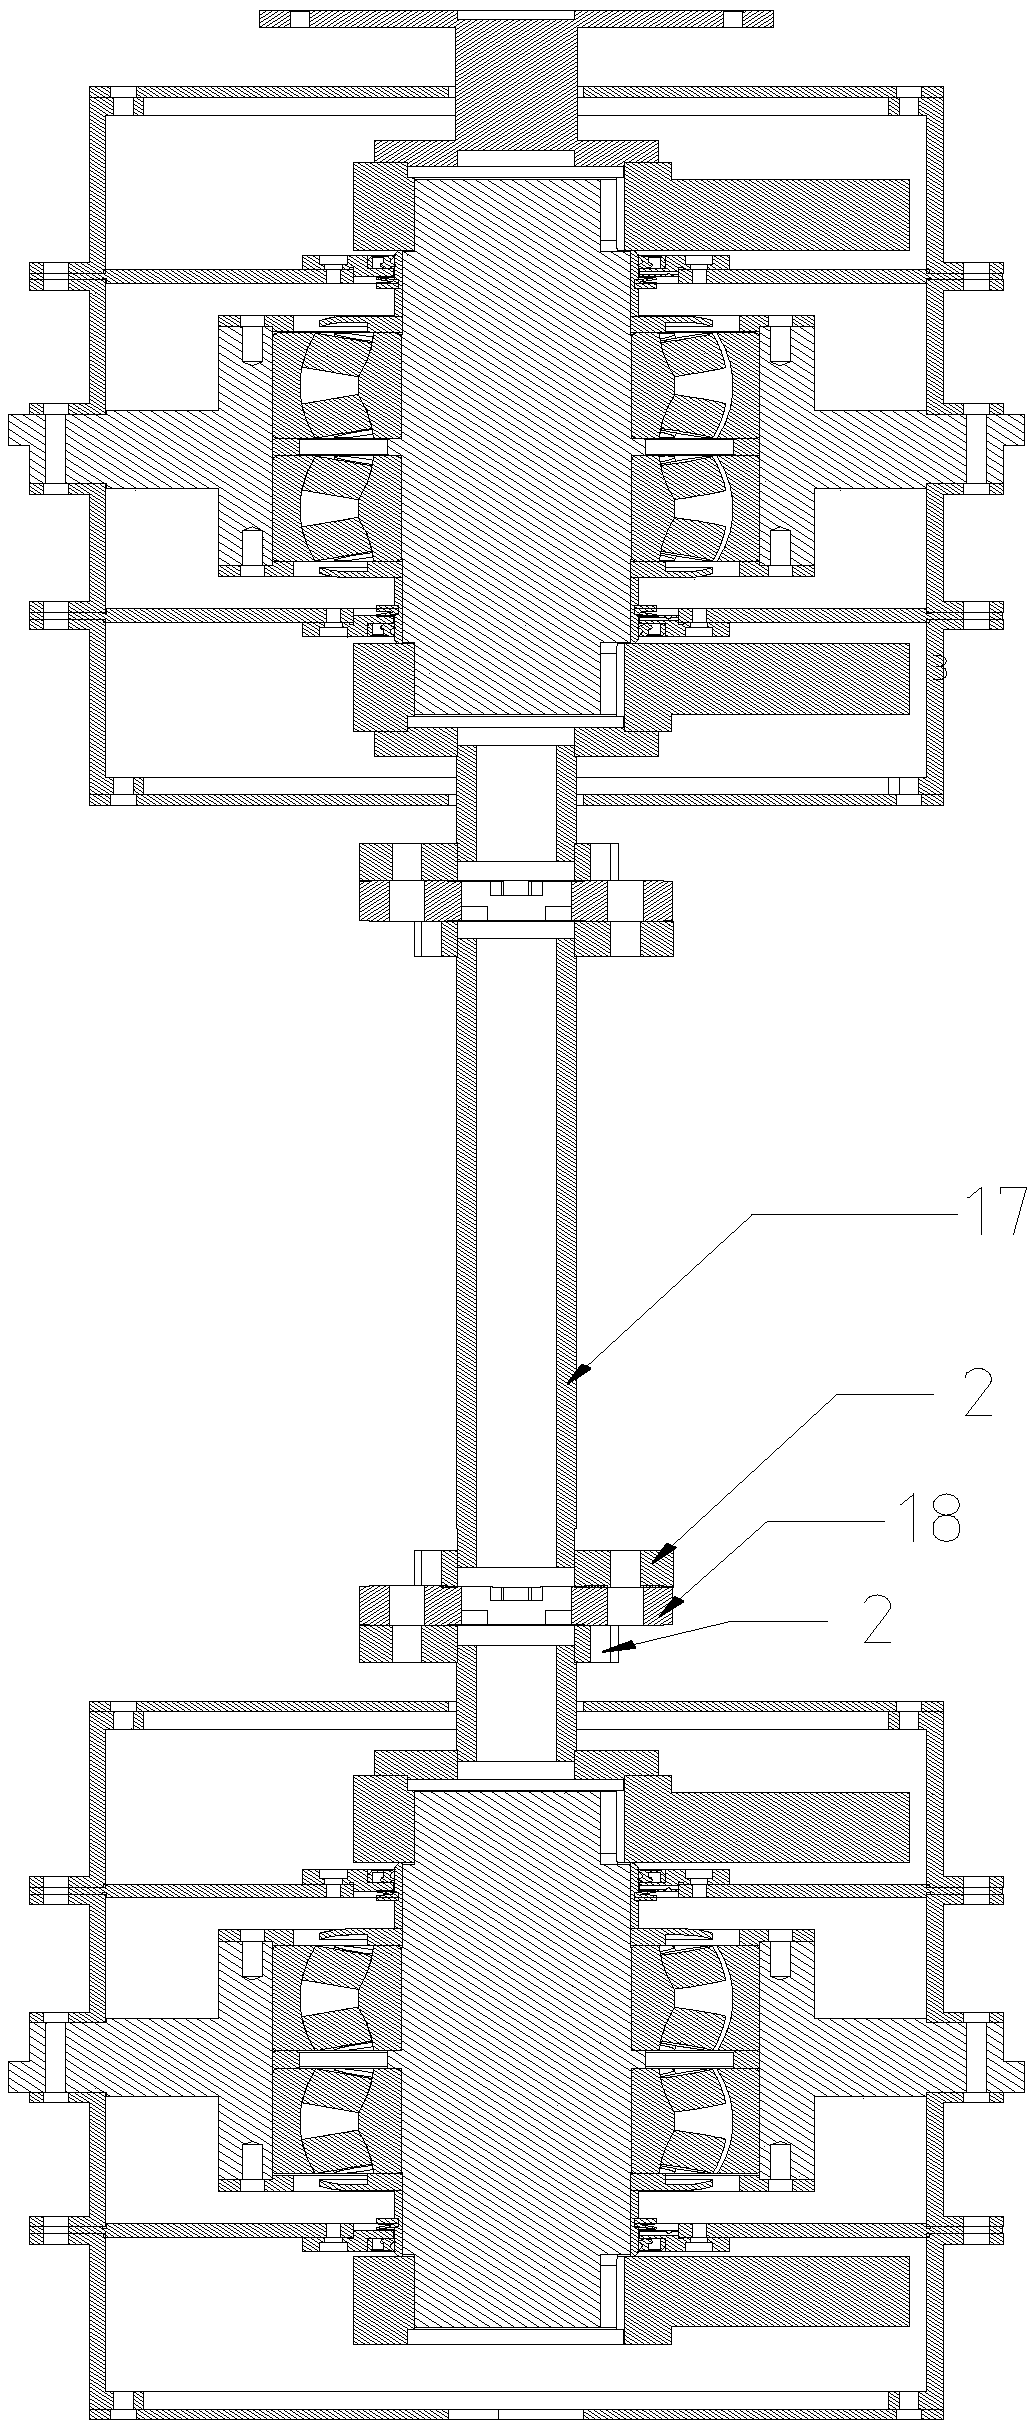 A vibration exciter assembly structure and vibrating screen